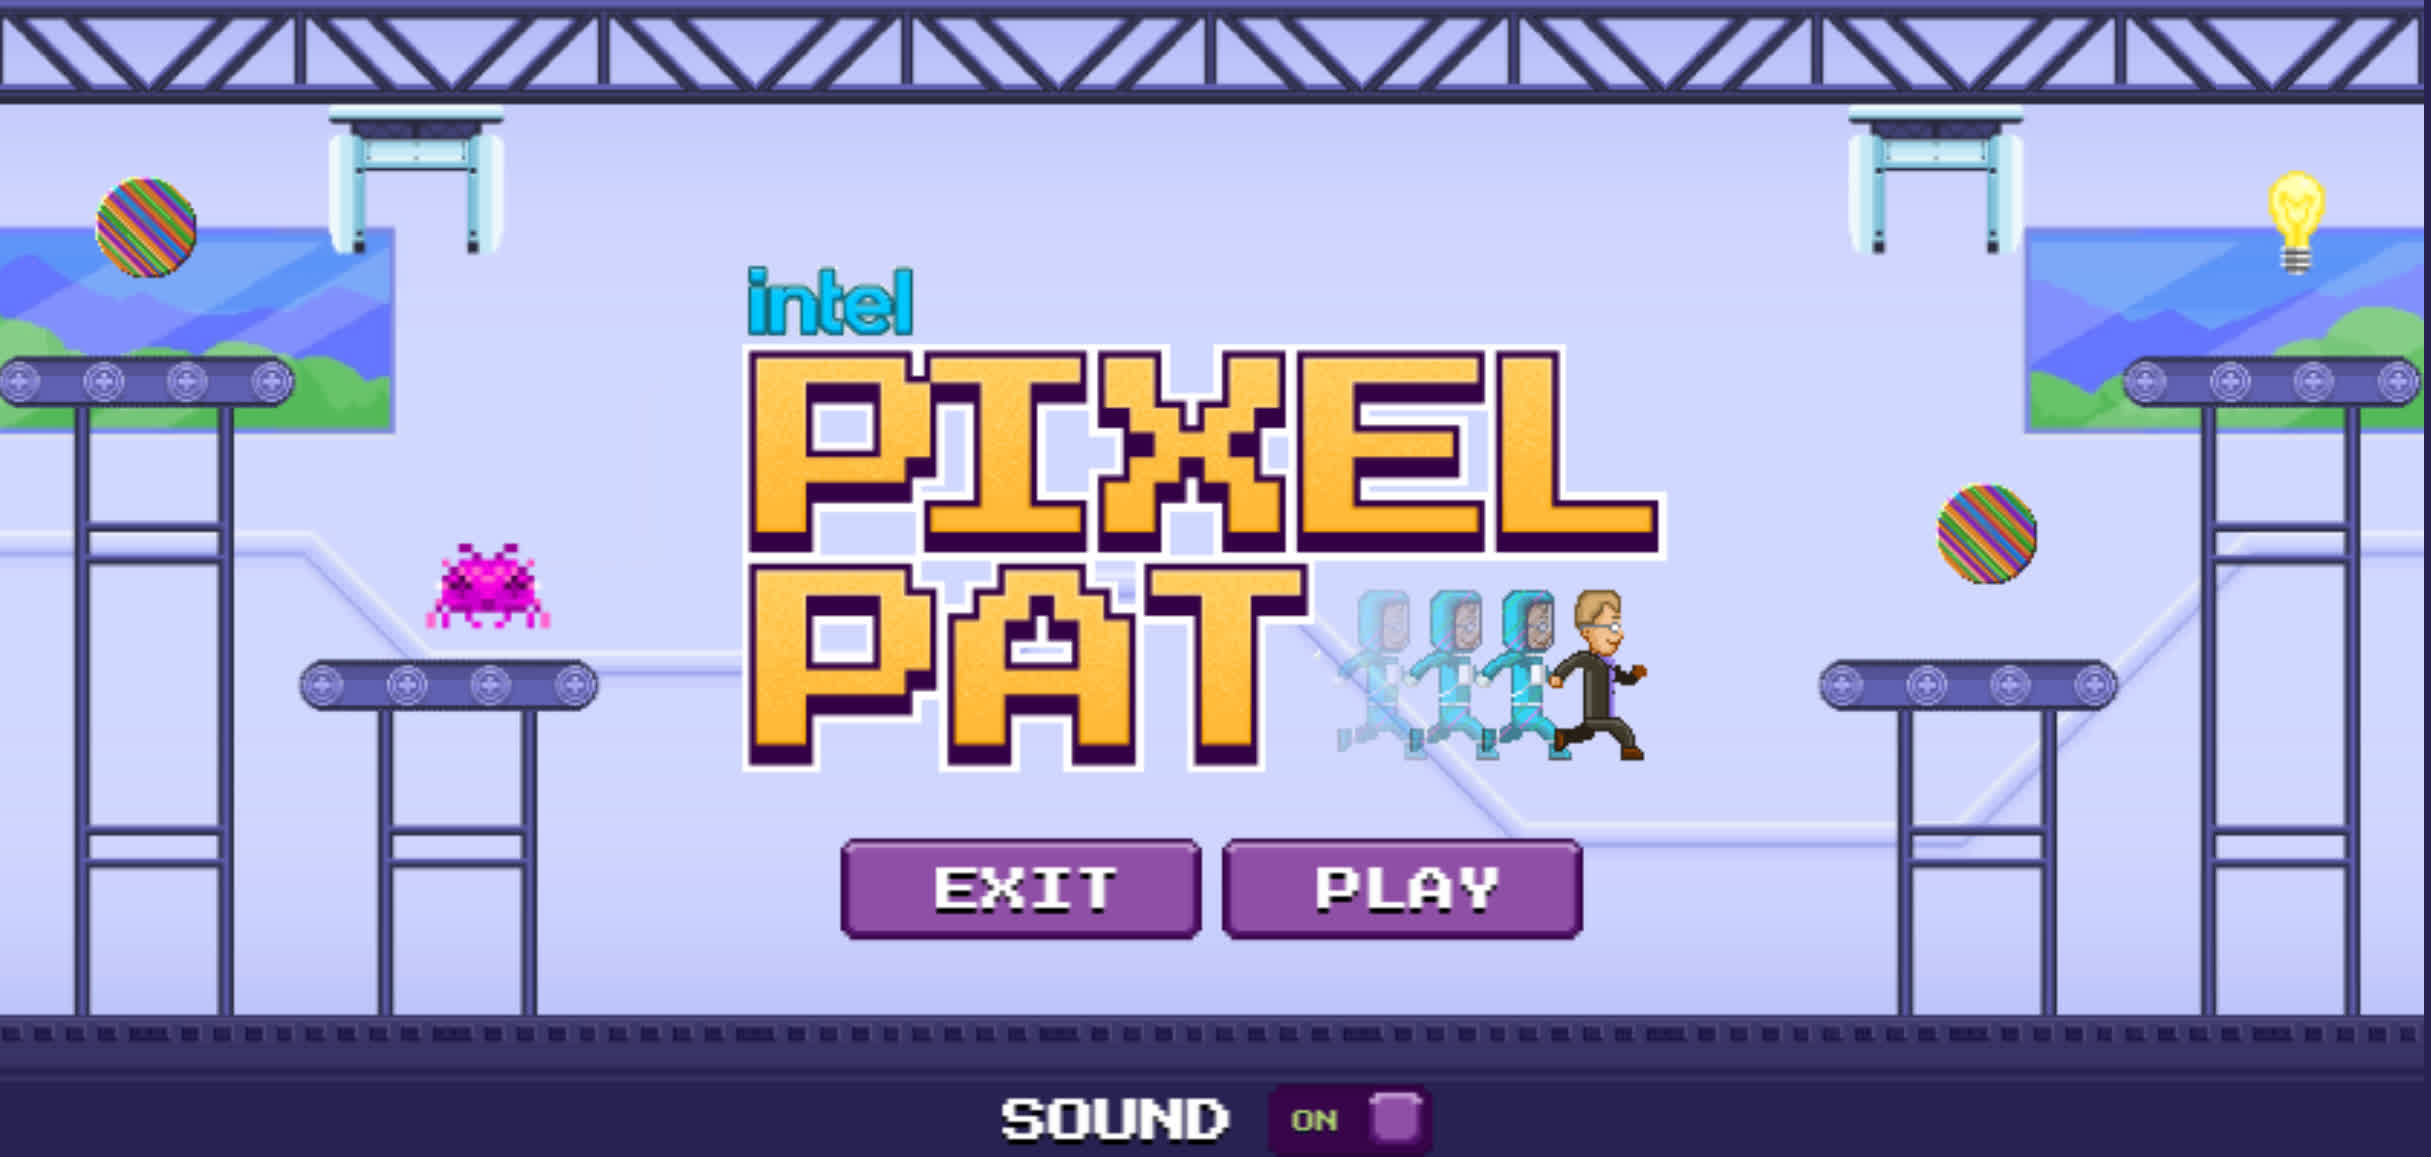 Intel launches retro-style browser game called Pixel Pat, featuring CEO Pat Gelsinger